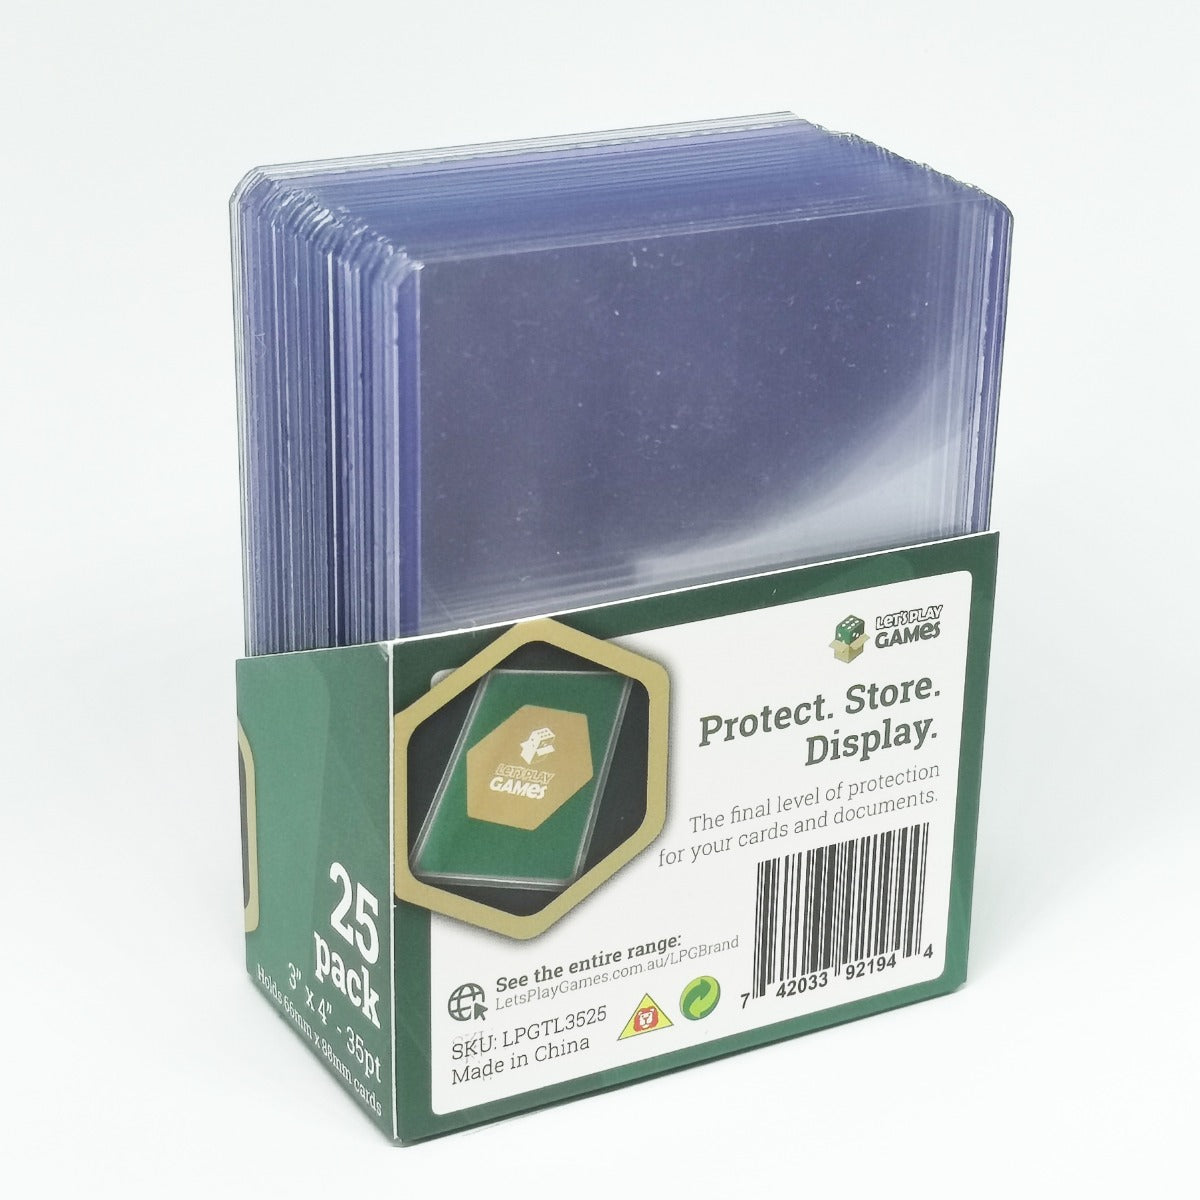 Top Loaded Card Protector 3"x4" 35pt (25)